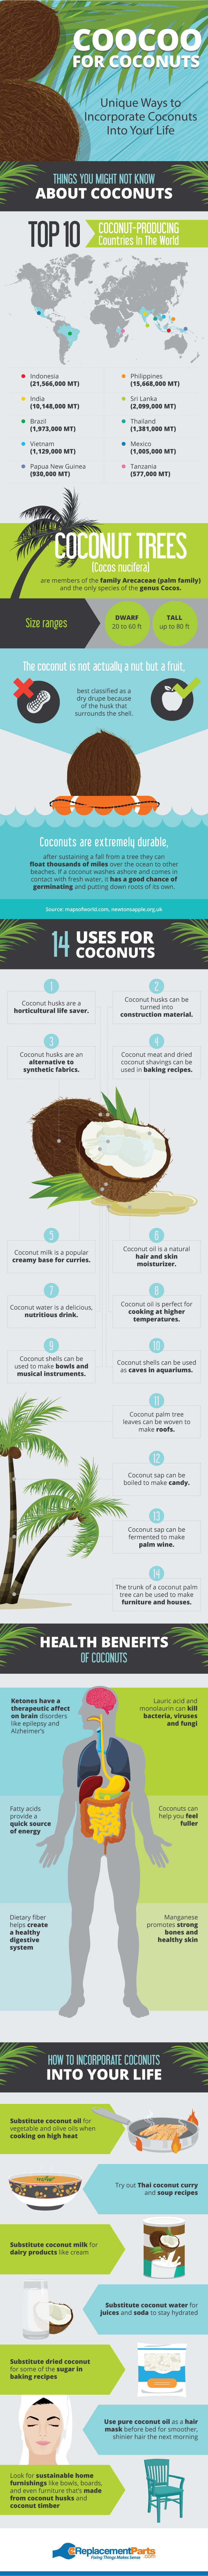 Unique Ways to Incorporate Coconuts into Your Life Infographic